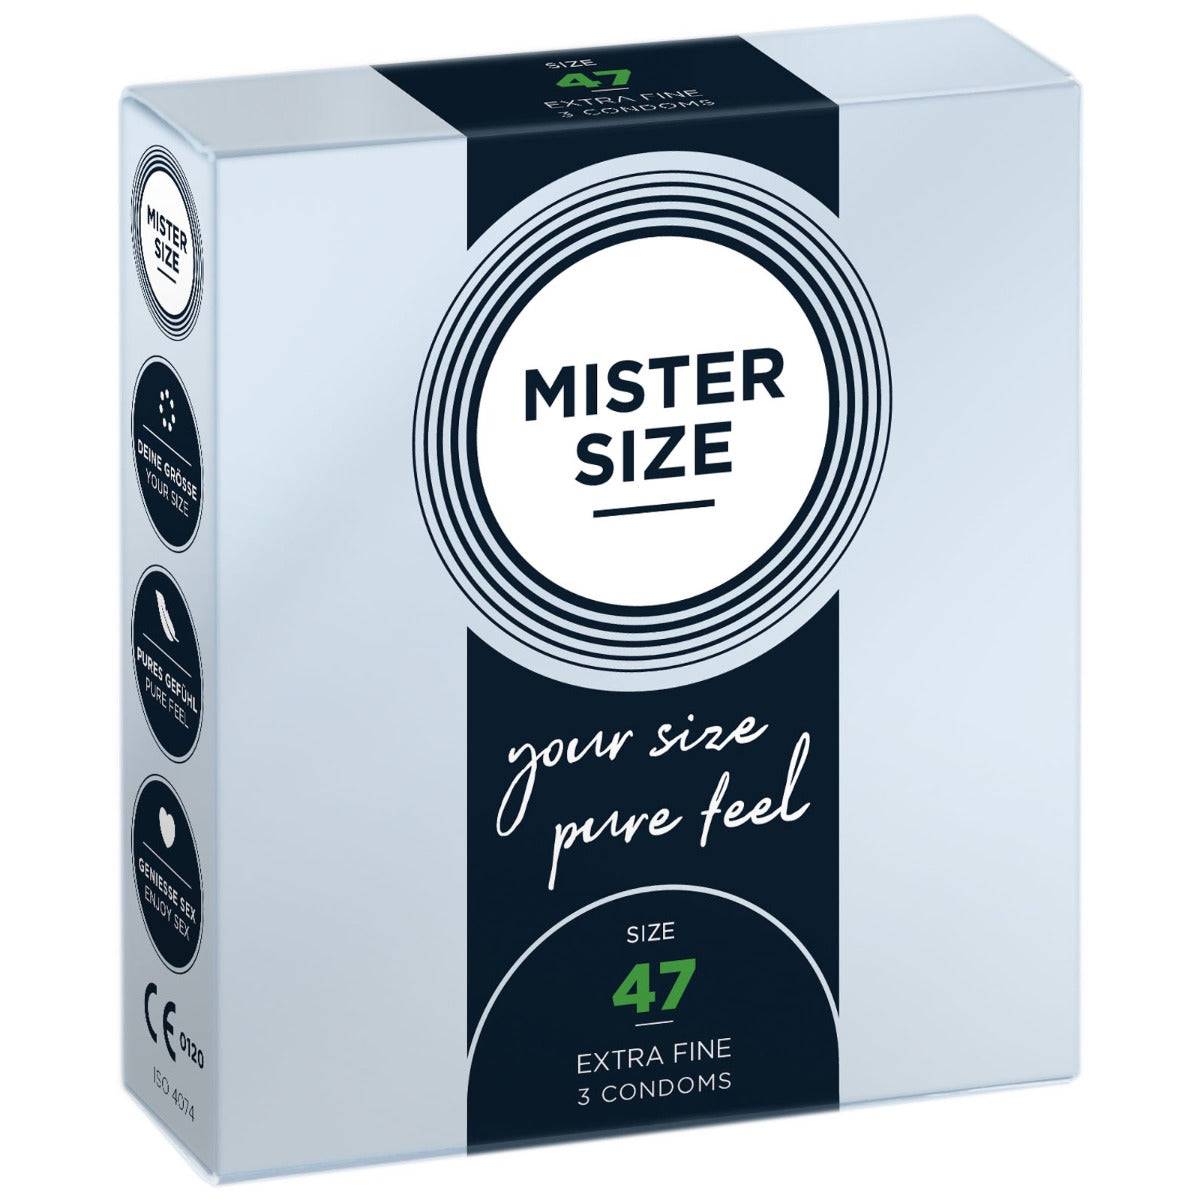 Mister Size Pure Feel Condoms Size 47mm 3 Pack - Simply Pleasure